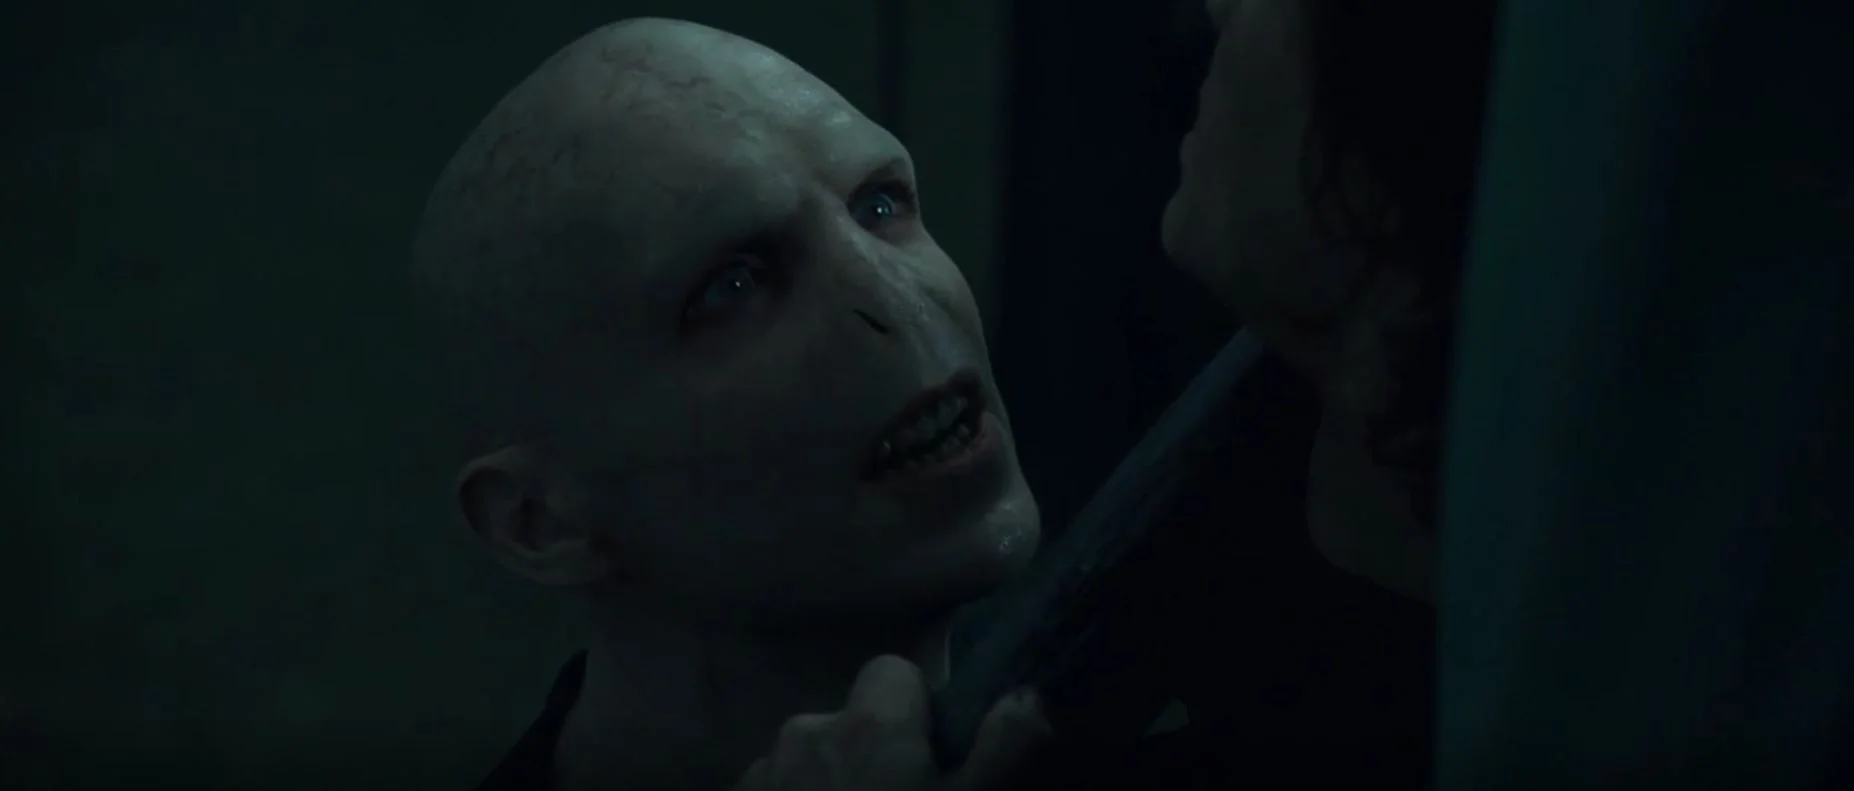 rumor ralph fiennes likely to play voldemort